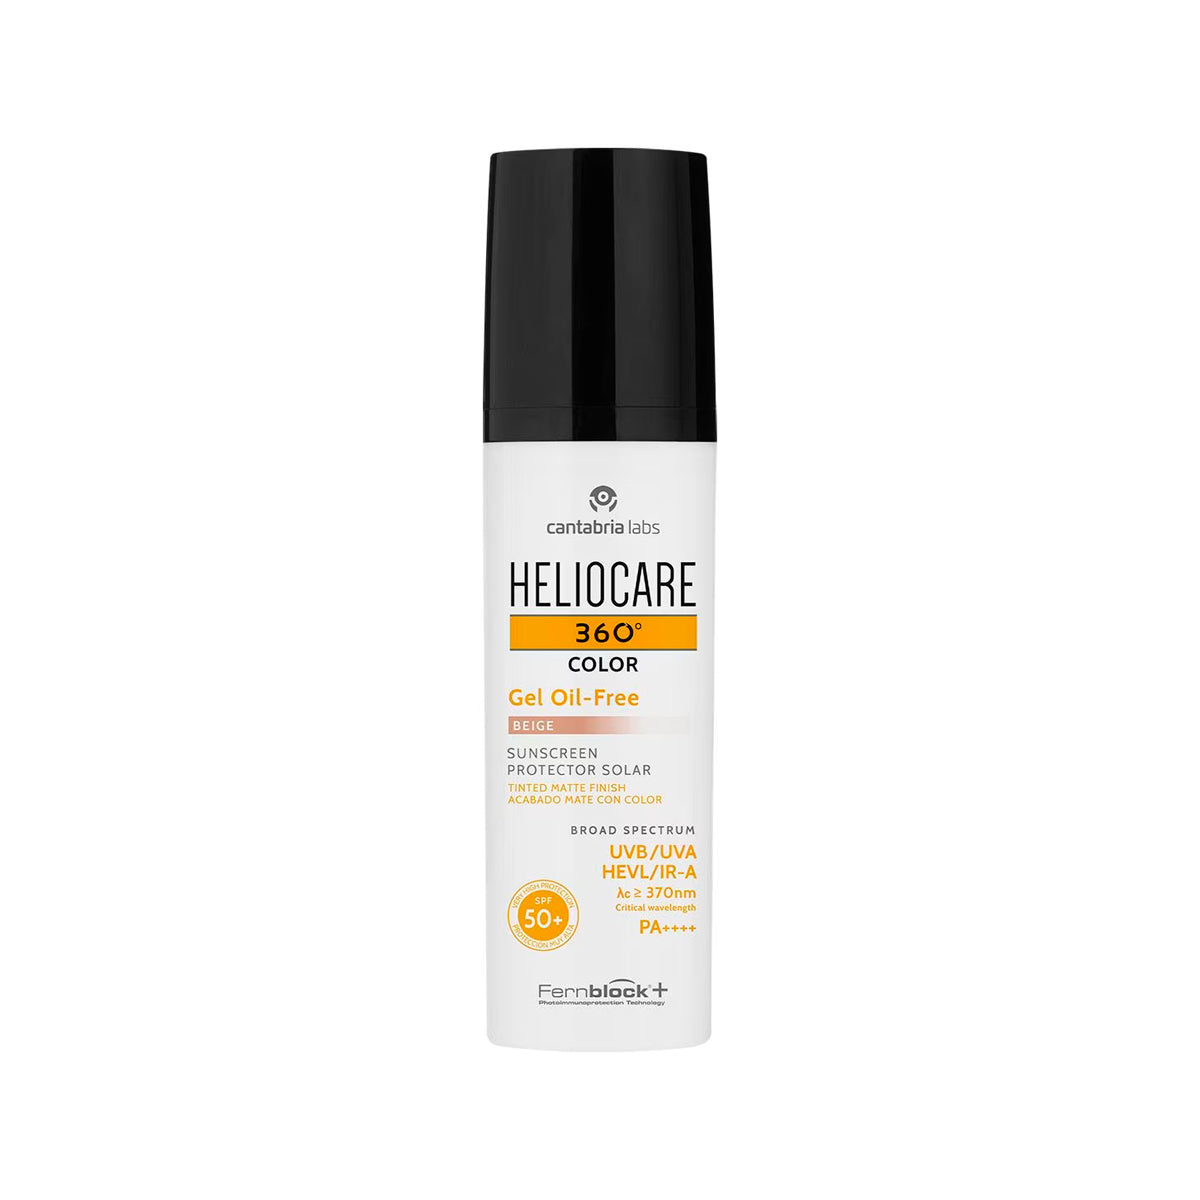 Heliocare 360° Gel Oil-Free Protector Solar FPS50+ Color Beige